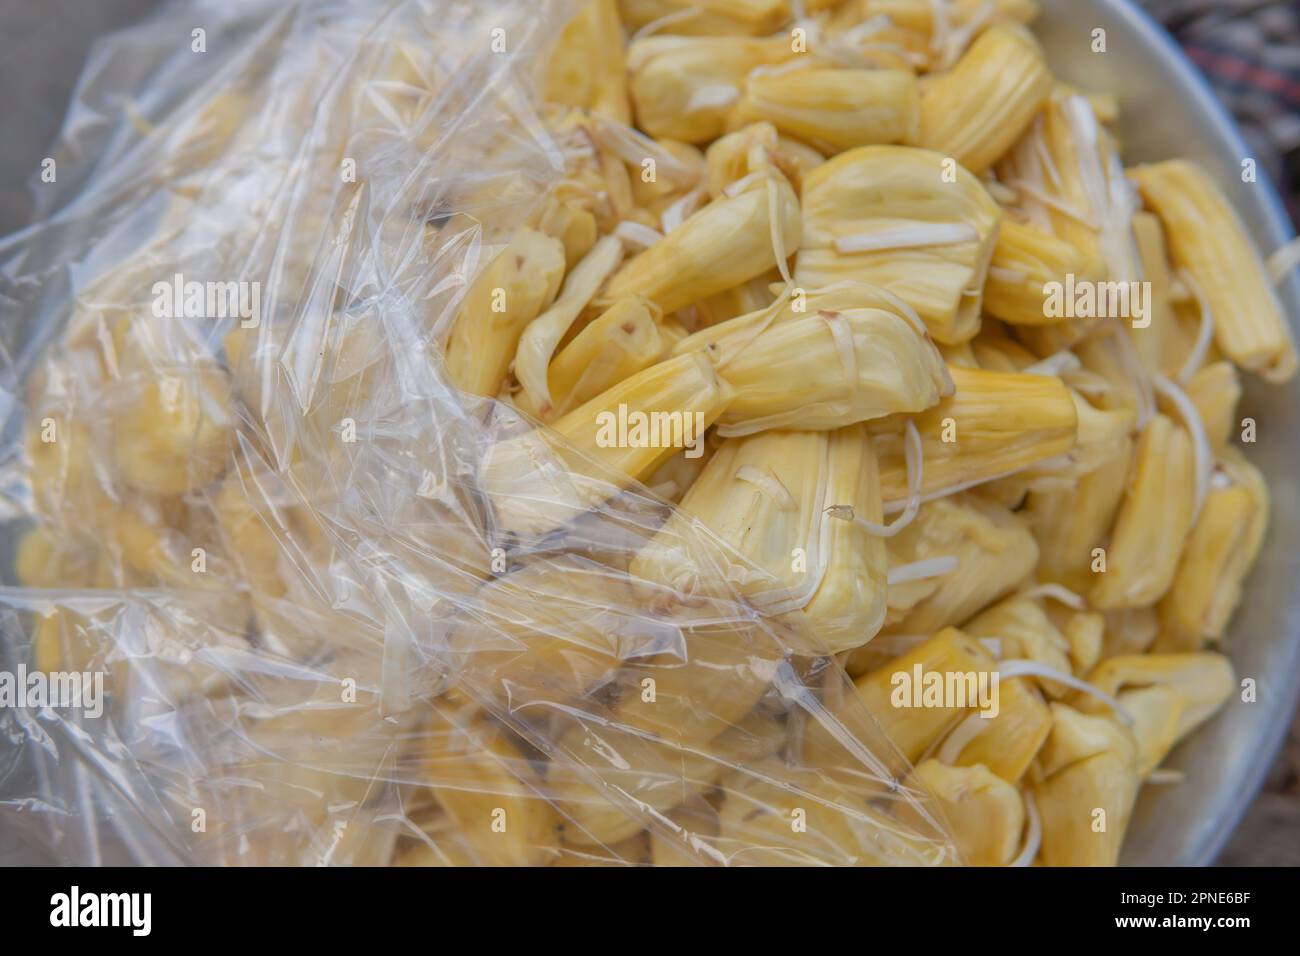 Jackfruit that is ripe and semi-closed with a clear plastic cover and ready to be sold is yellow in colour. Stock Photo